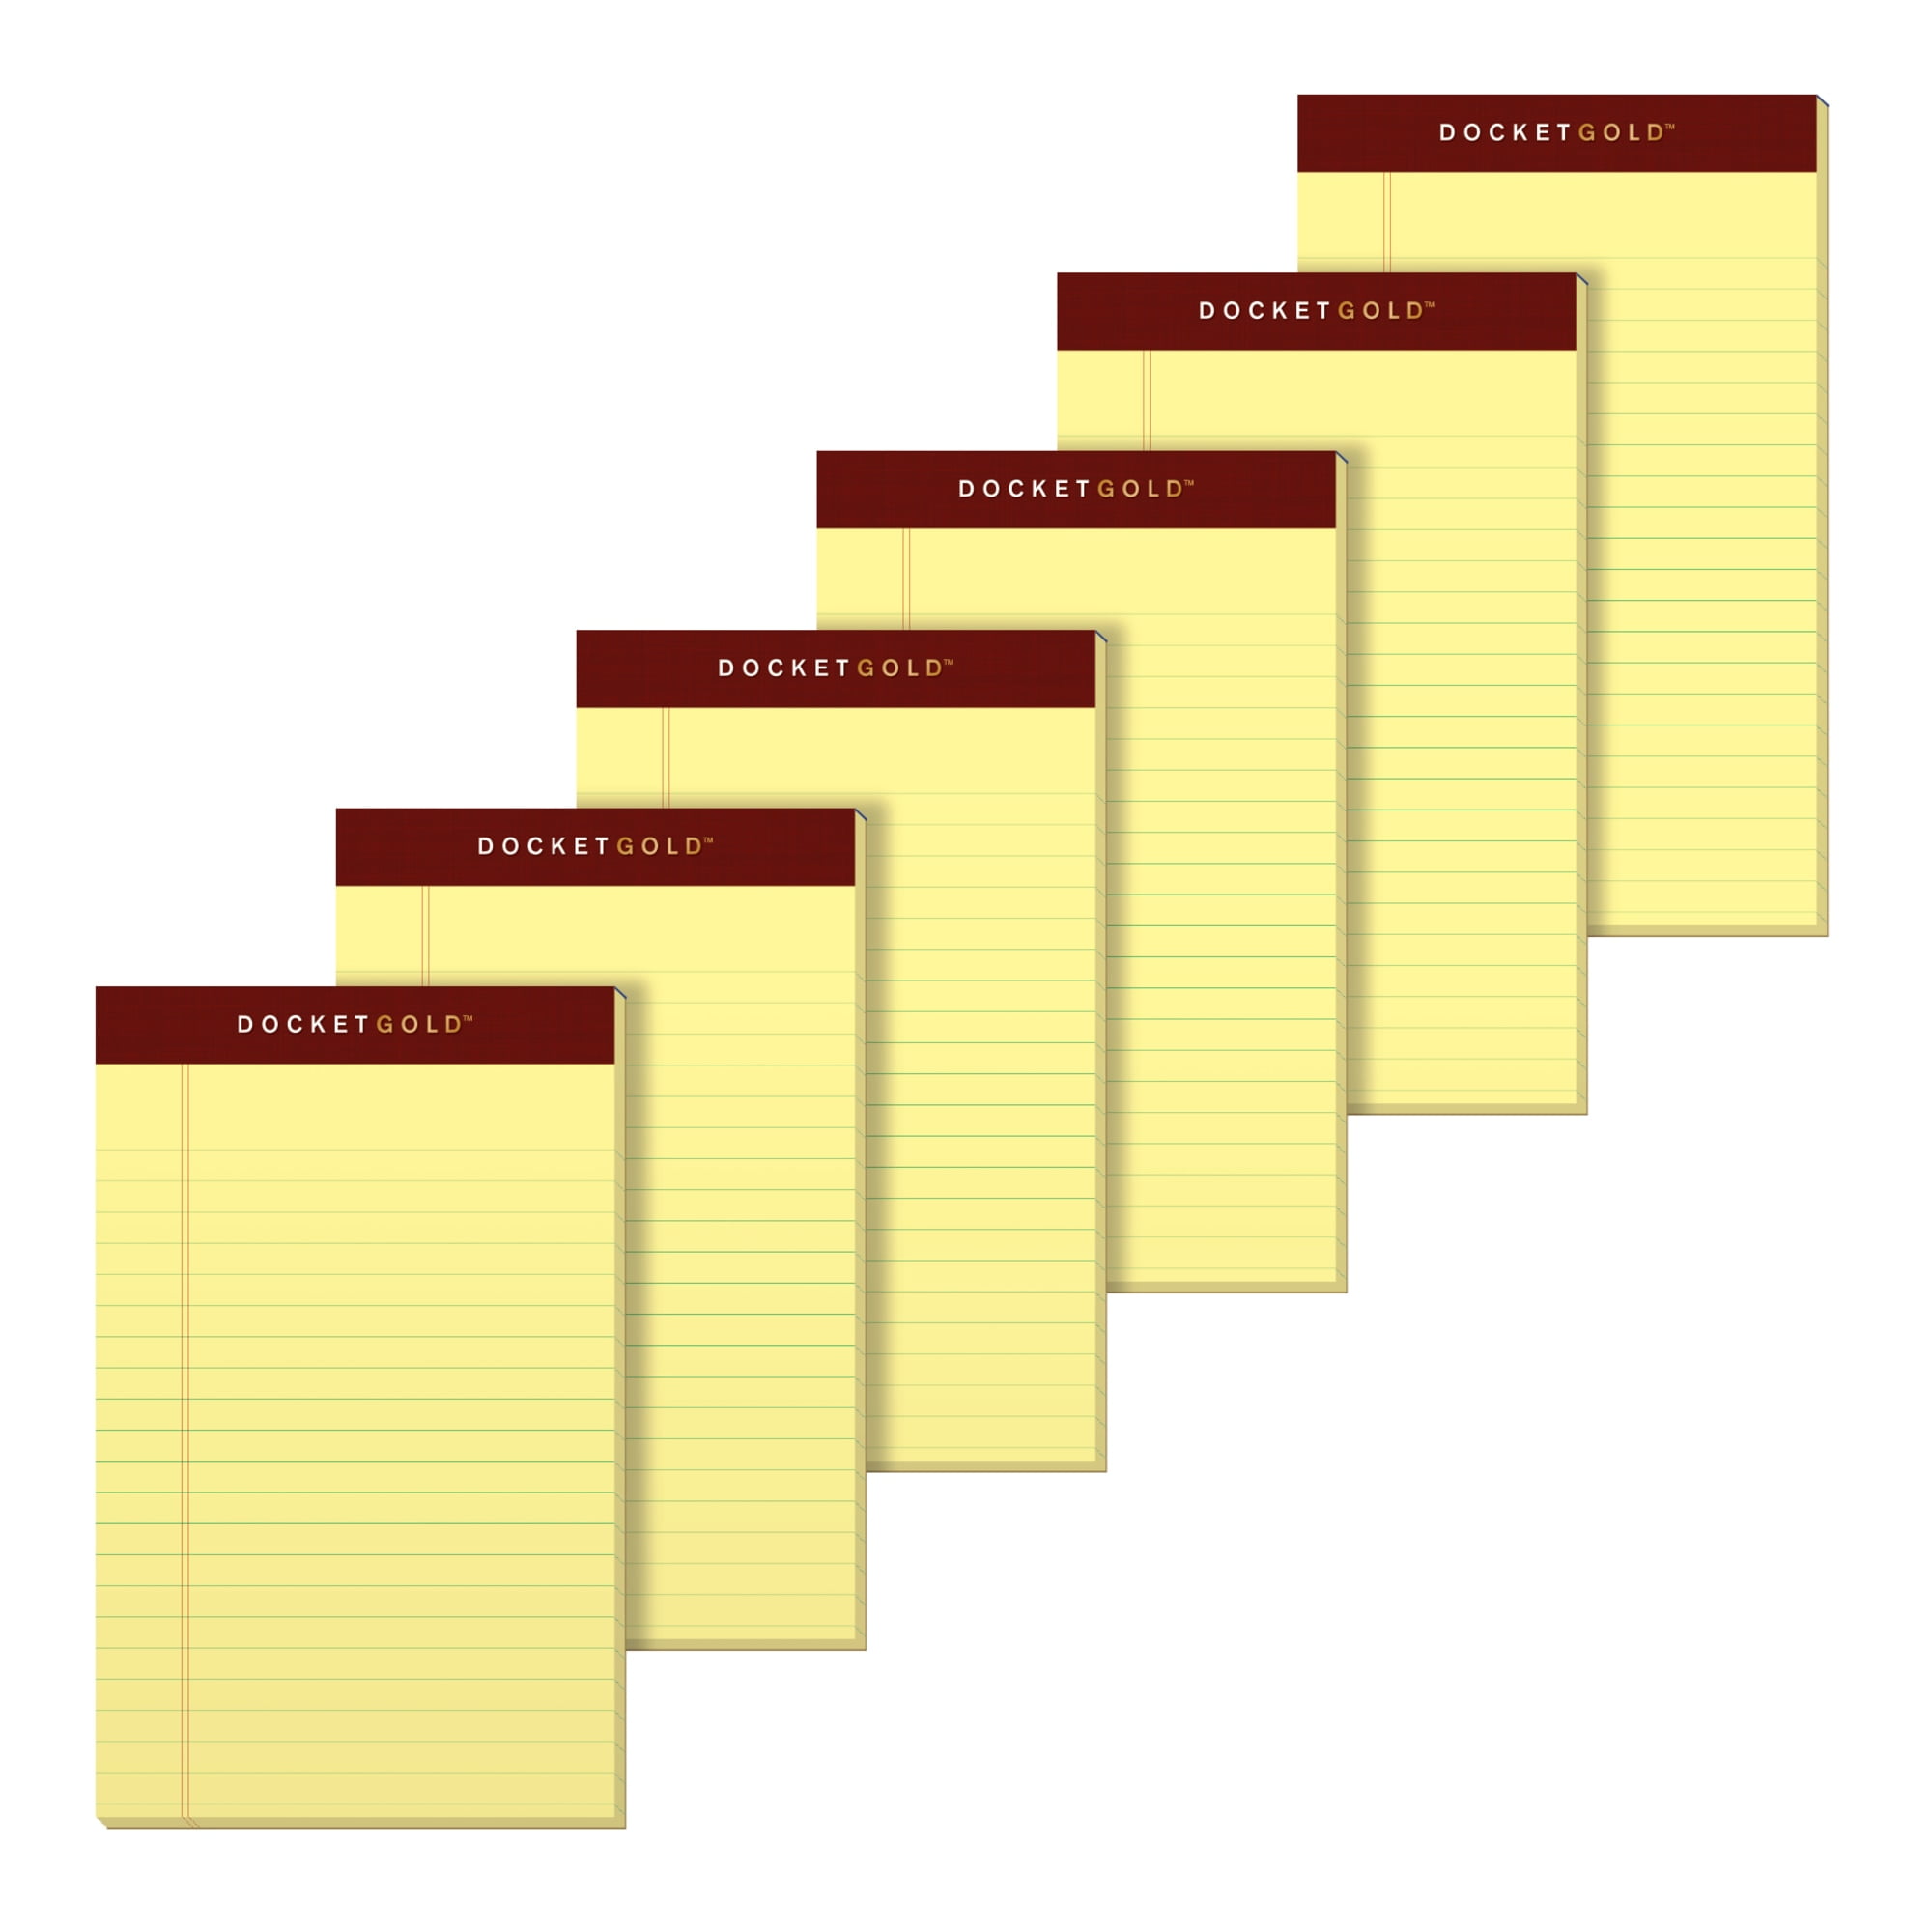 TOPS Docket Gold Project Planner 8-1/2 x 99701 25932997013 